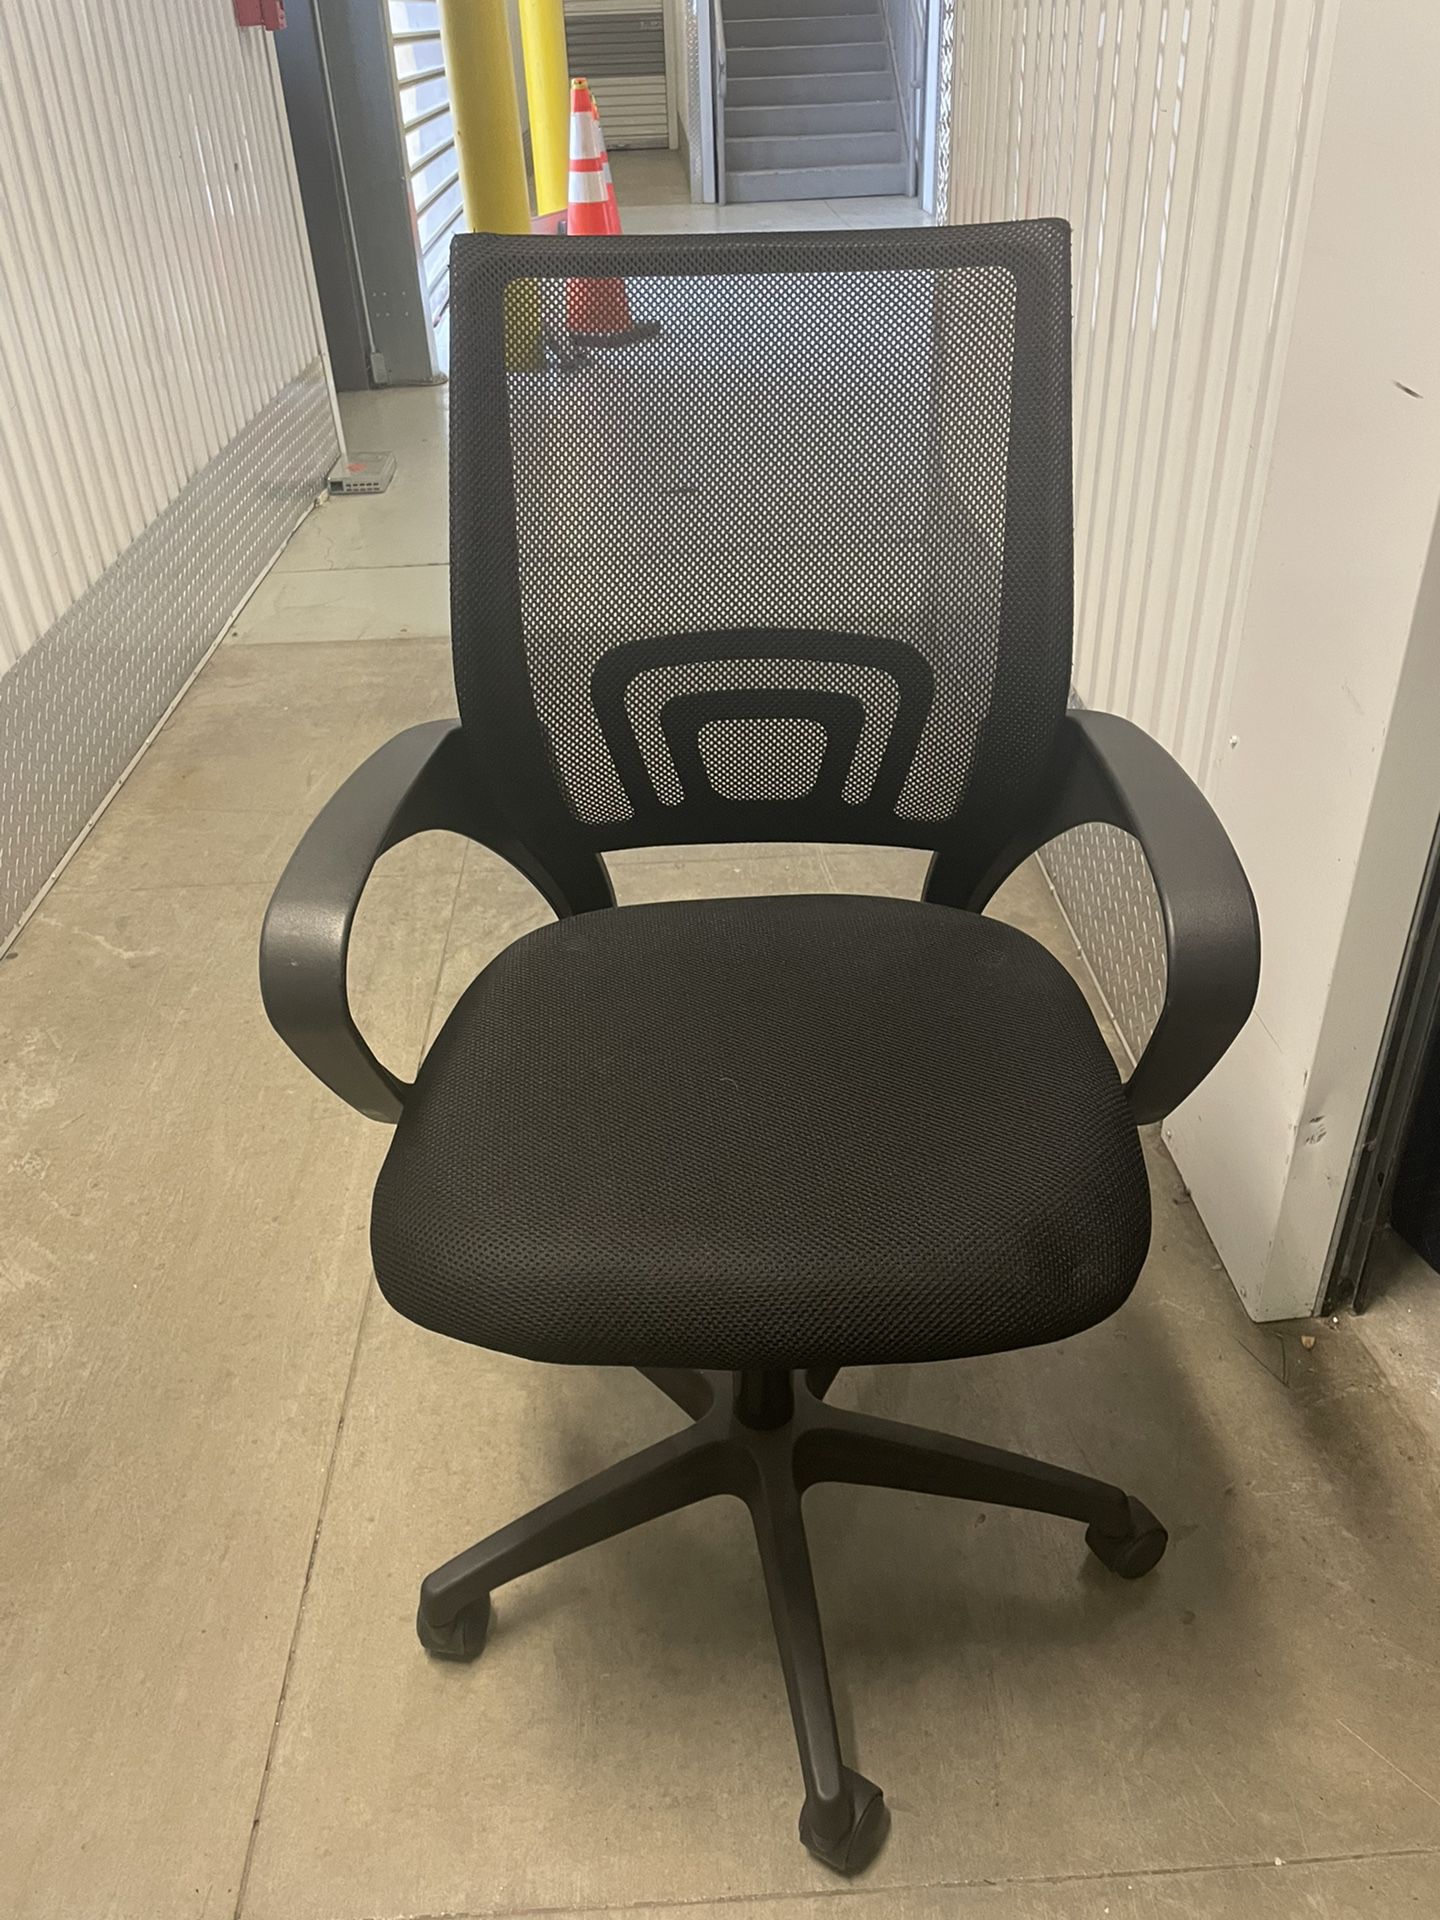 Office Chair In Storage $40